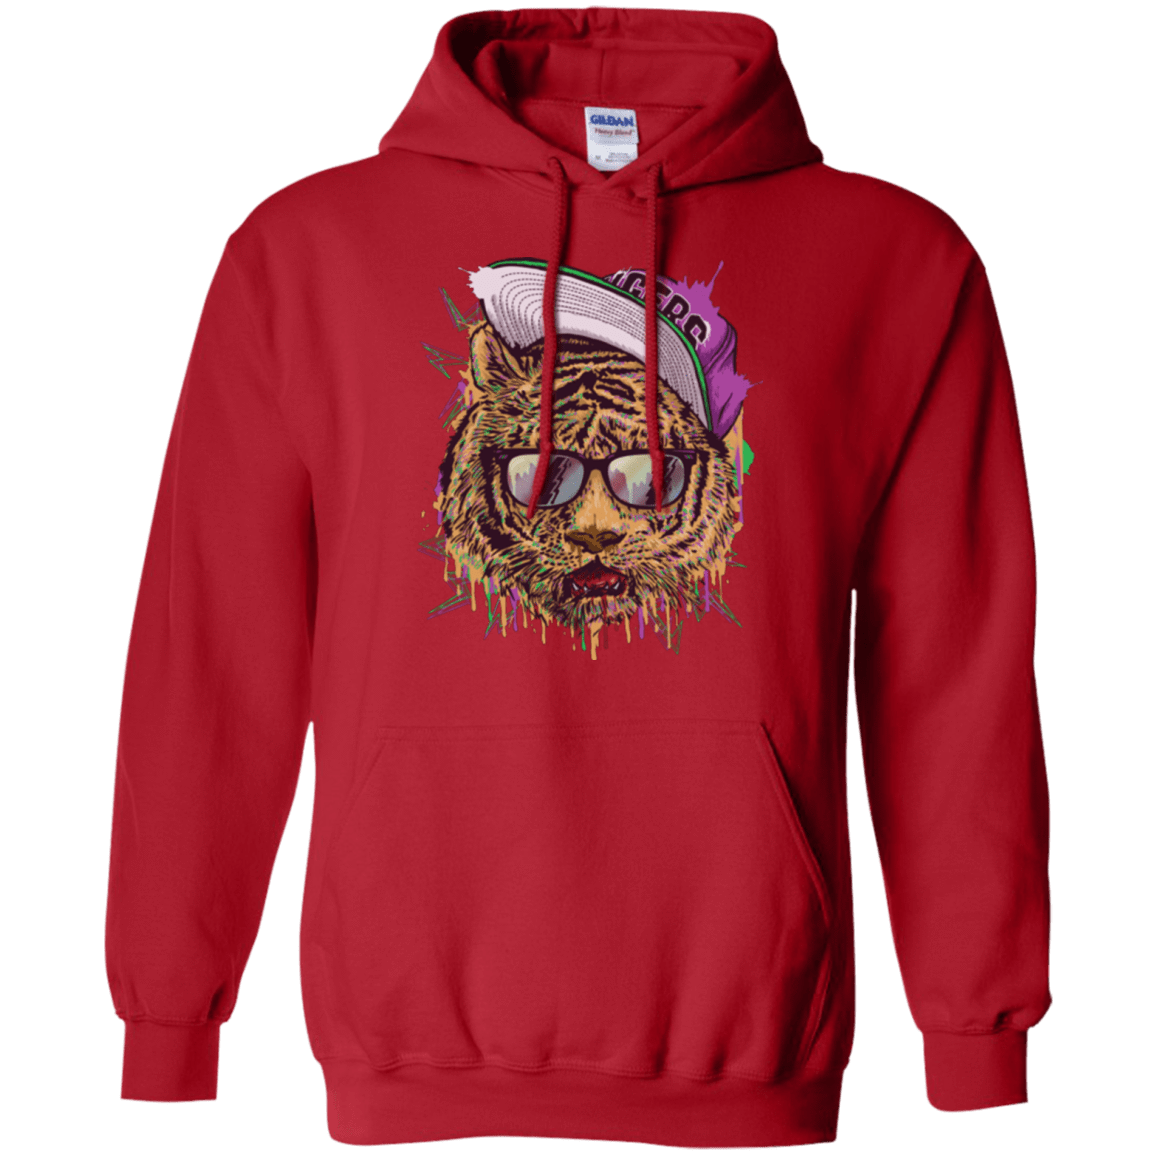 Sweatshirts Red / Small Bayside Tigers Pullover Hoodie